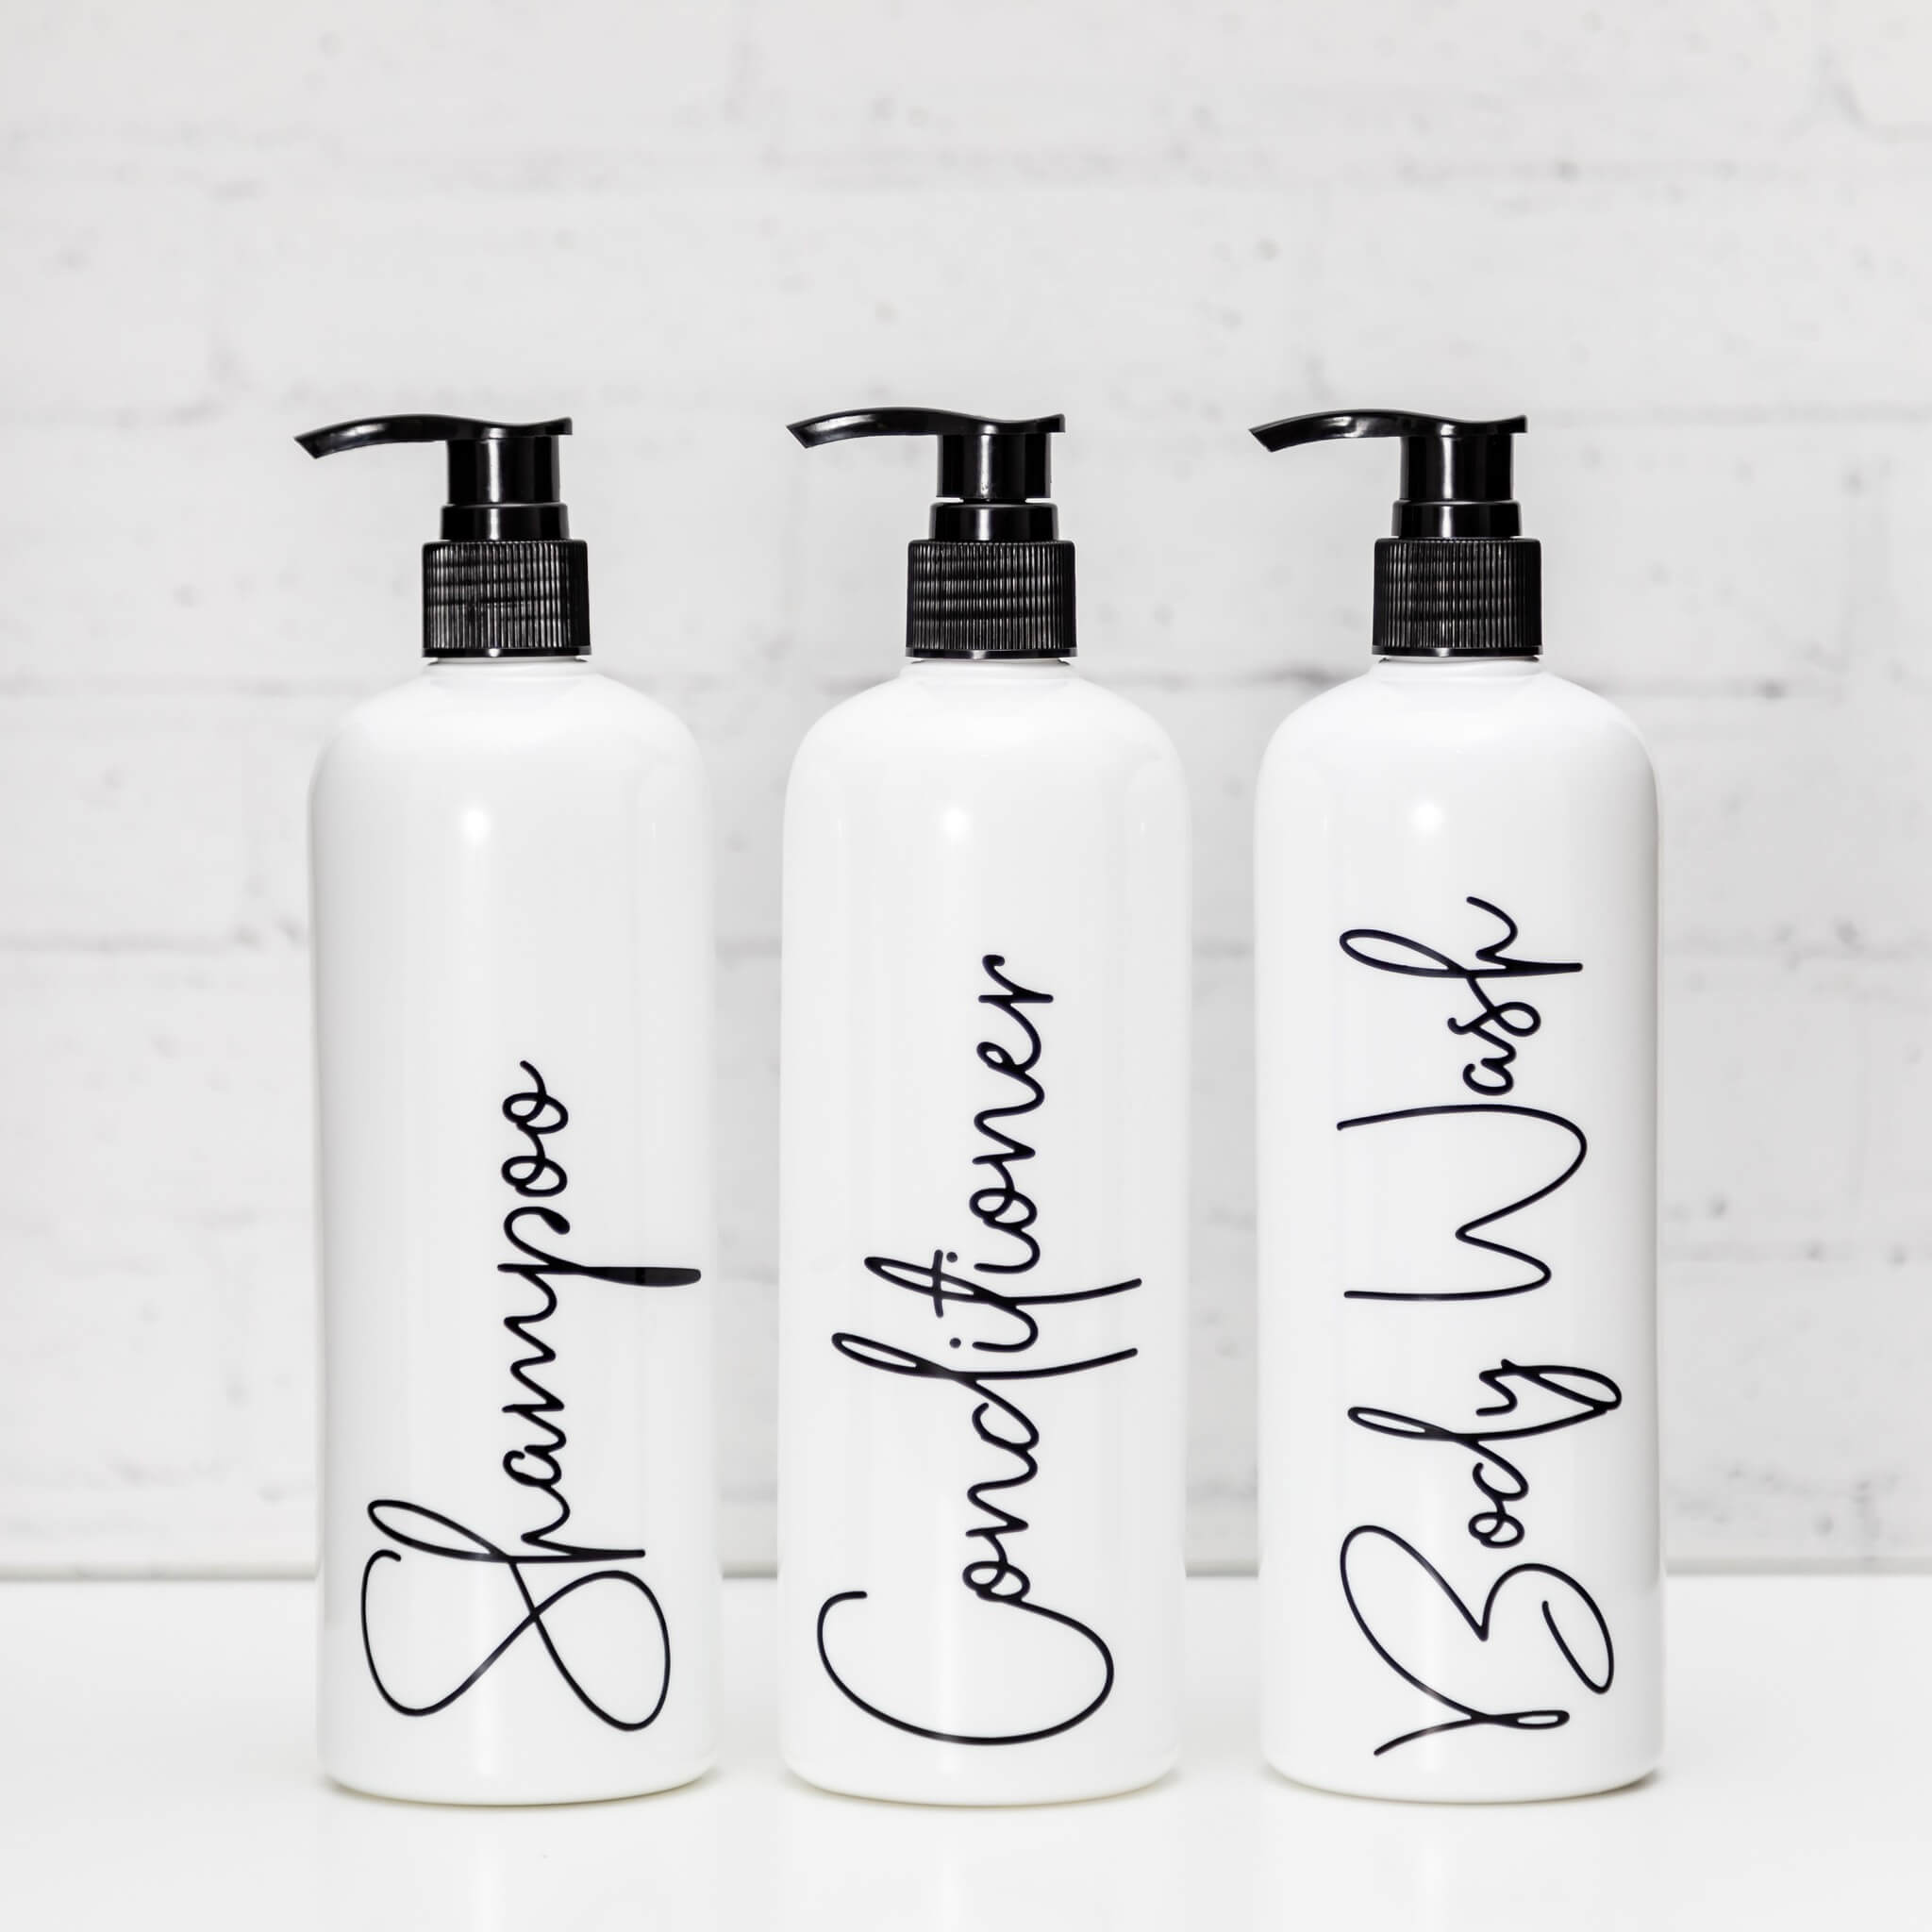 Buy Refillable Shampoo & Conditioner Bottles with Pump, Dispenser